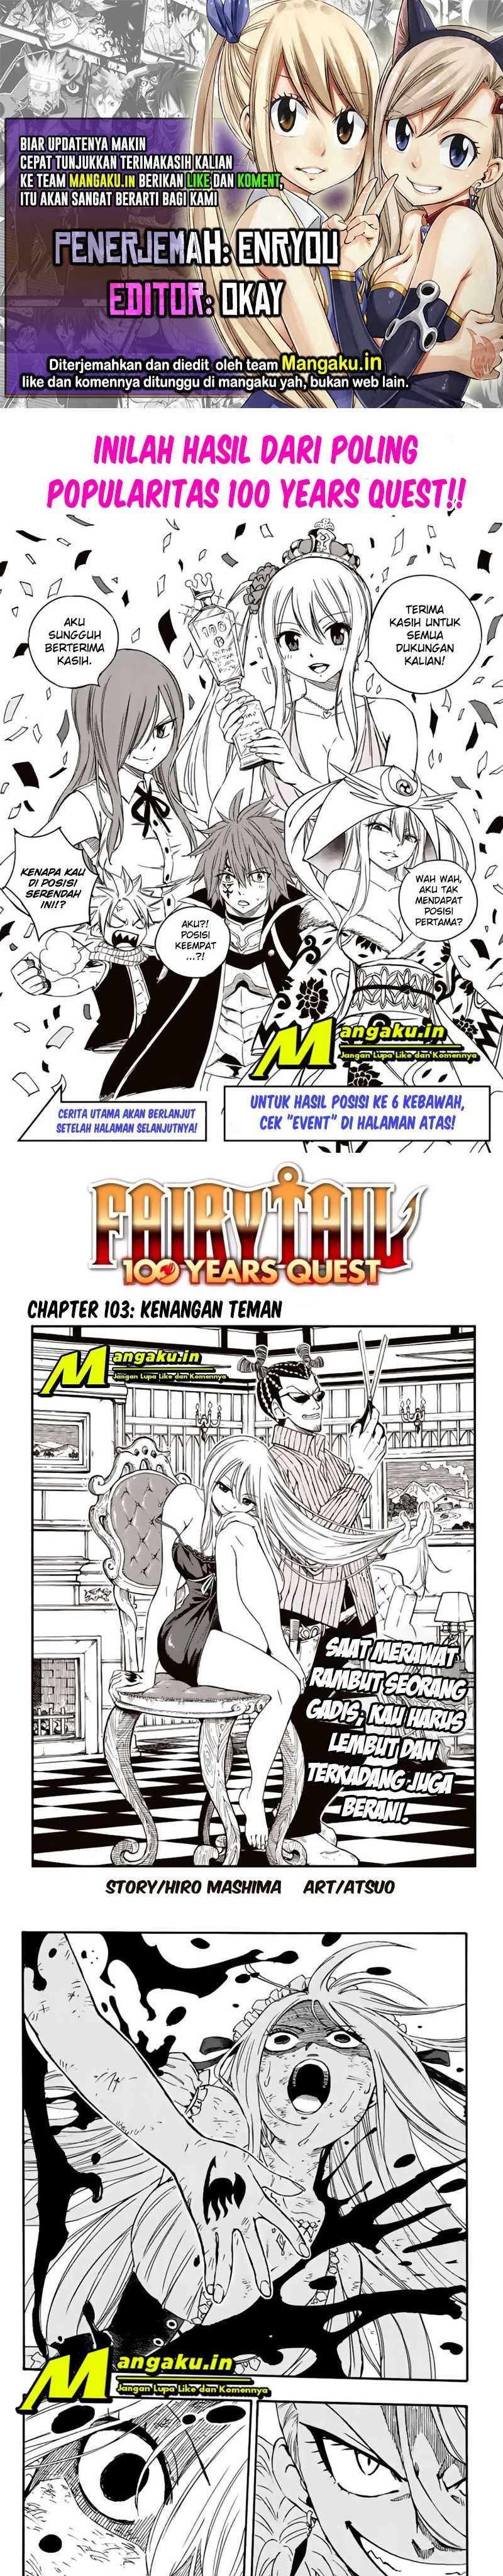 Fairy Tail: 100 Years Quest: Chapter 103 - Page 1